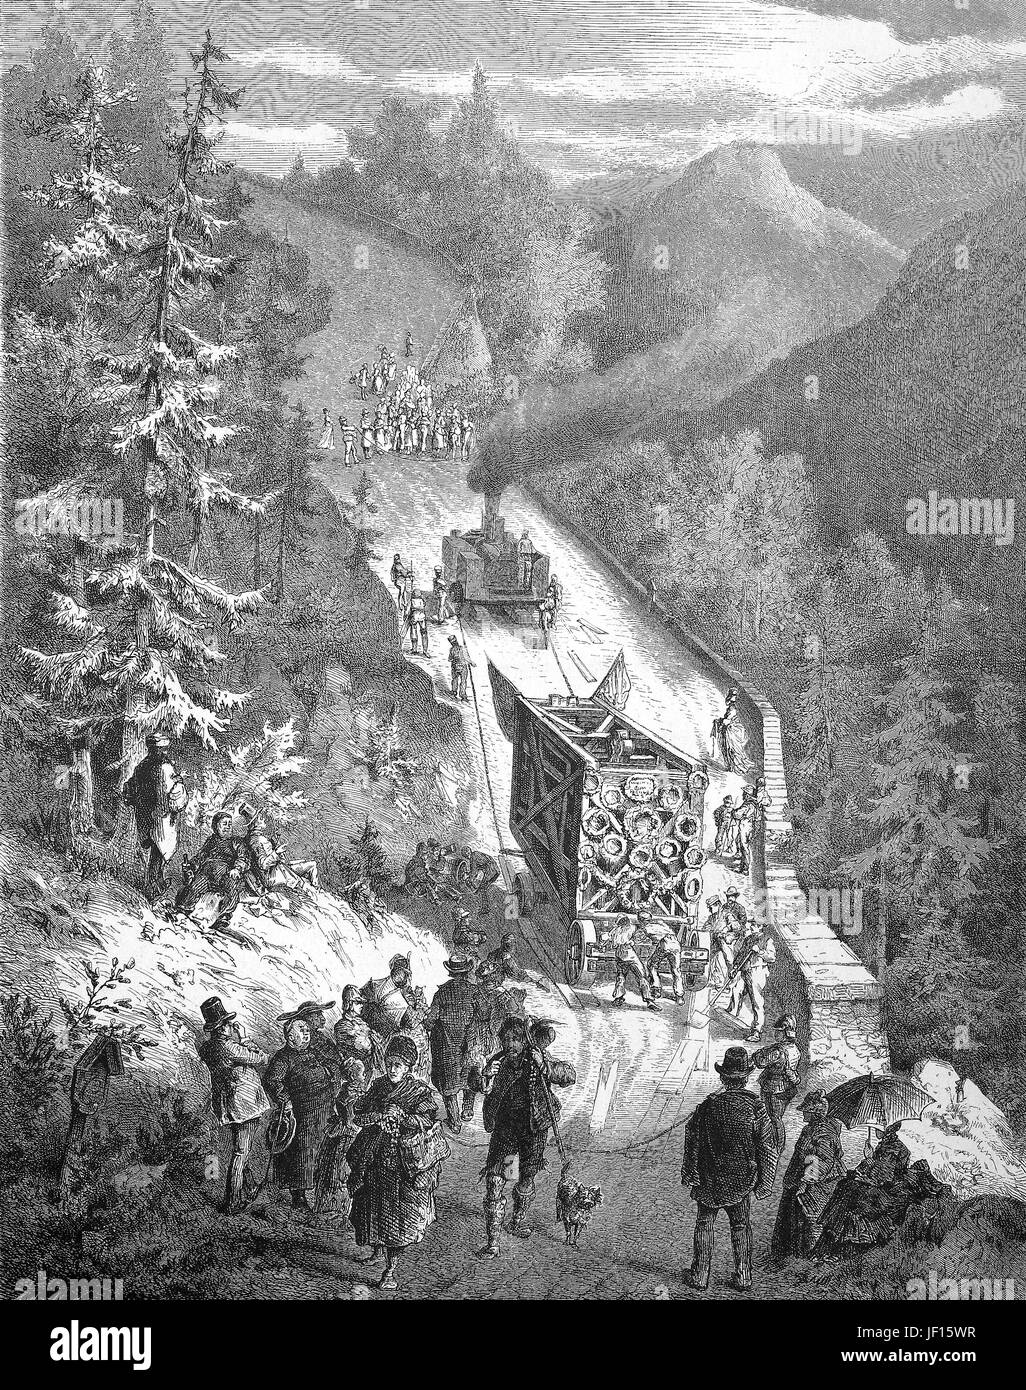 Historical illustration showing the transport of the parts of a big cruzifix on a mountain pass in the bavarian alps near Ettal, Bavaria, Germany. The Kreuzigungsgruppe, cruzifix group, near Oberammergau was paid by king Ludwig II., Louis II, Digital improved reproduction from an original print from 1888 Stock Photo